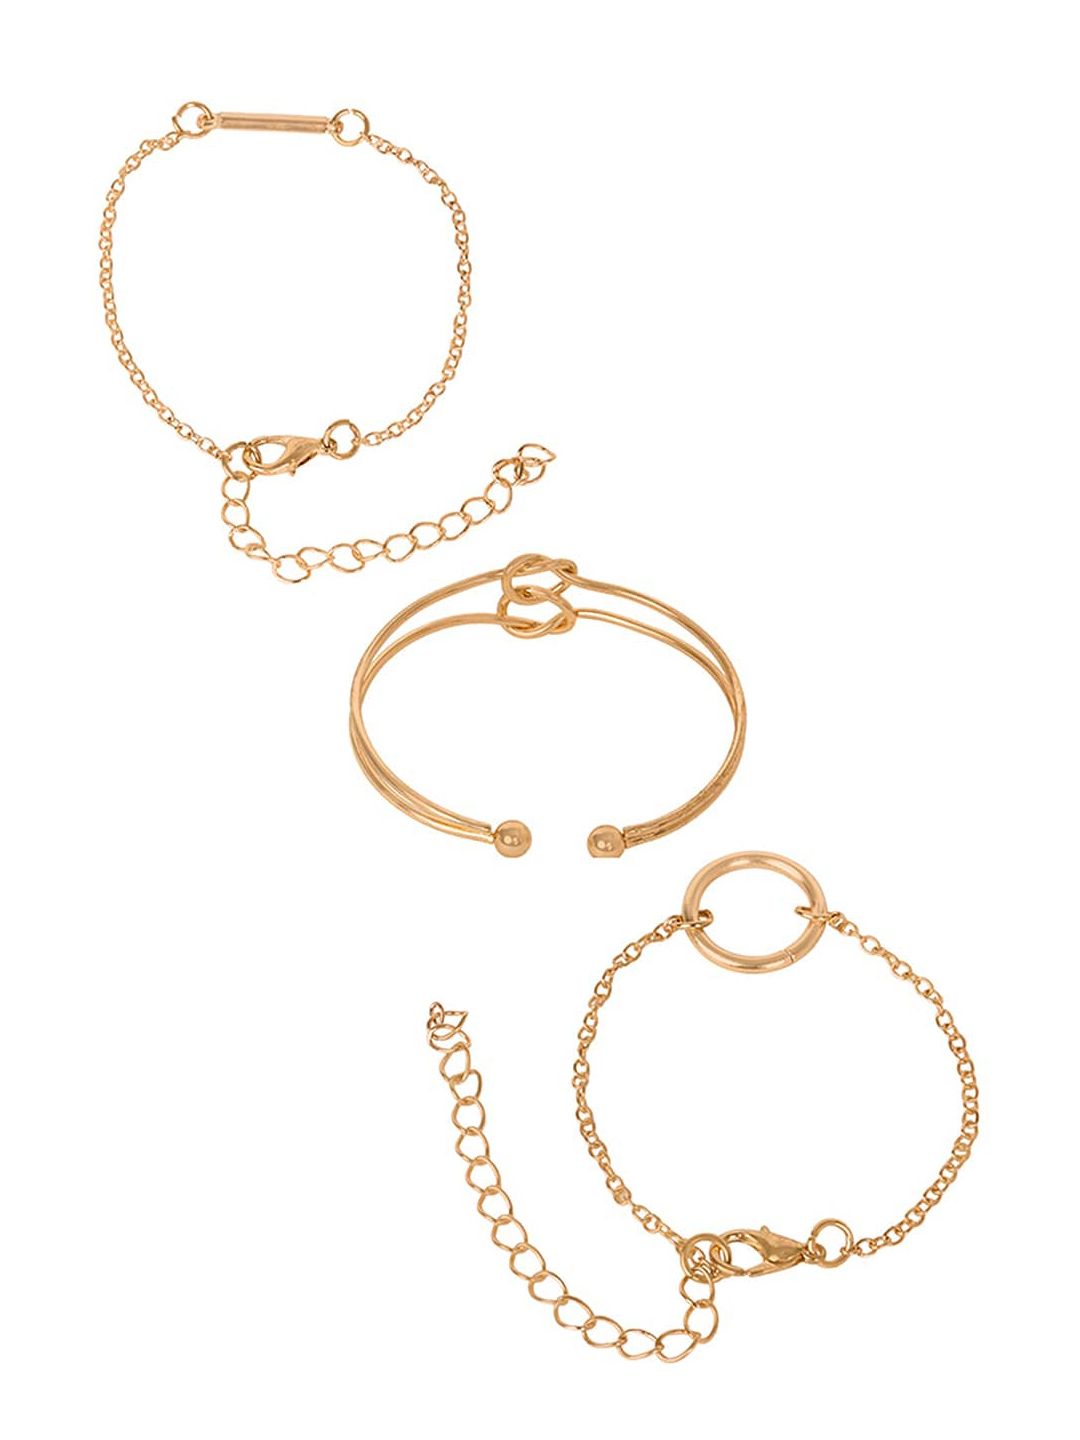 FabAlley Women Set of 3 Gold-Plated Bracelets Price in India